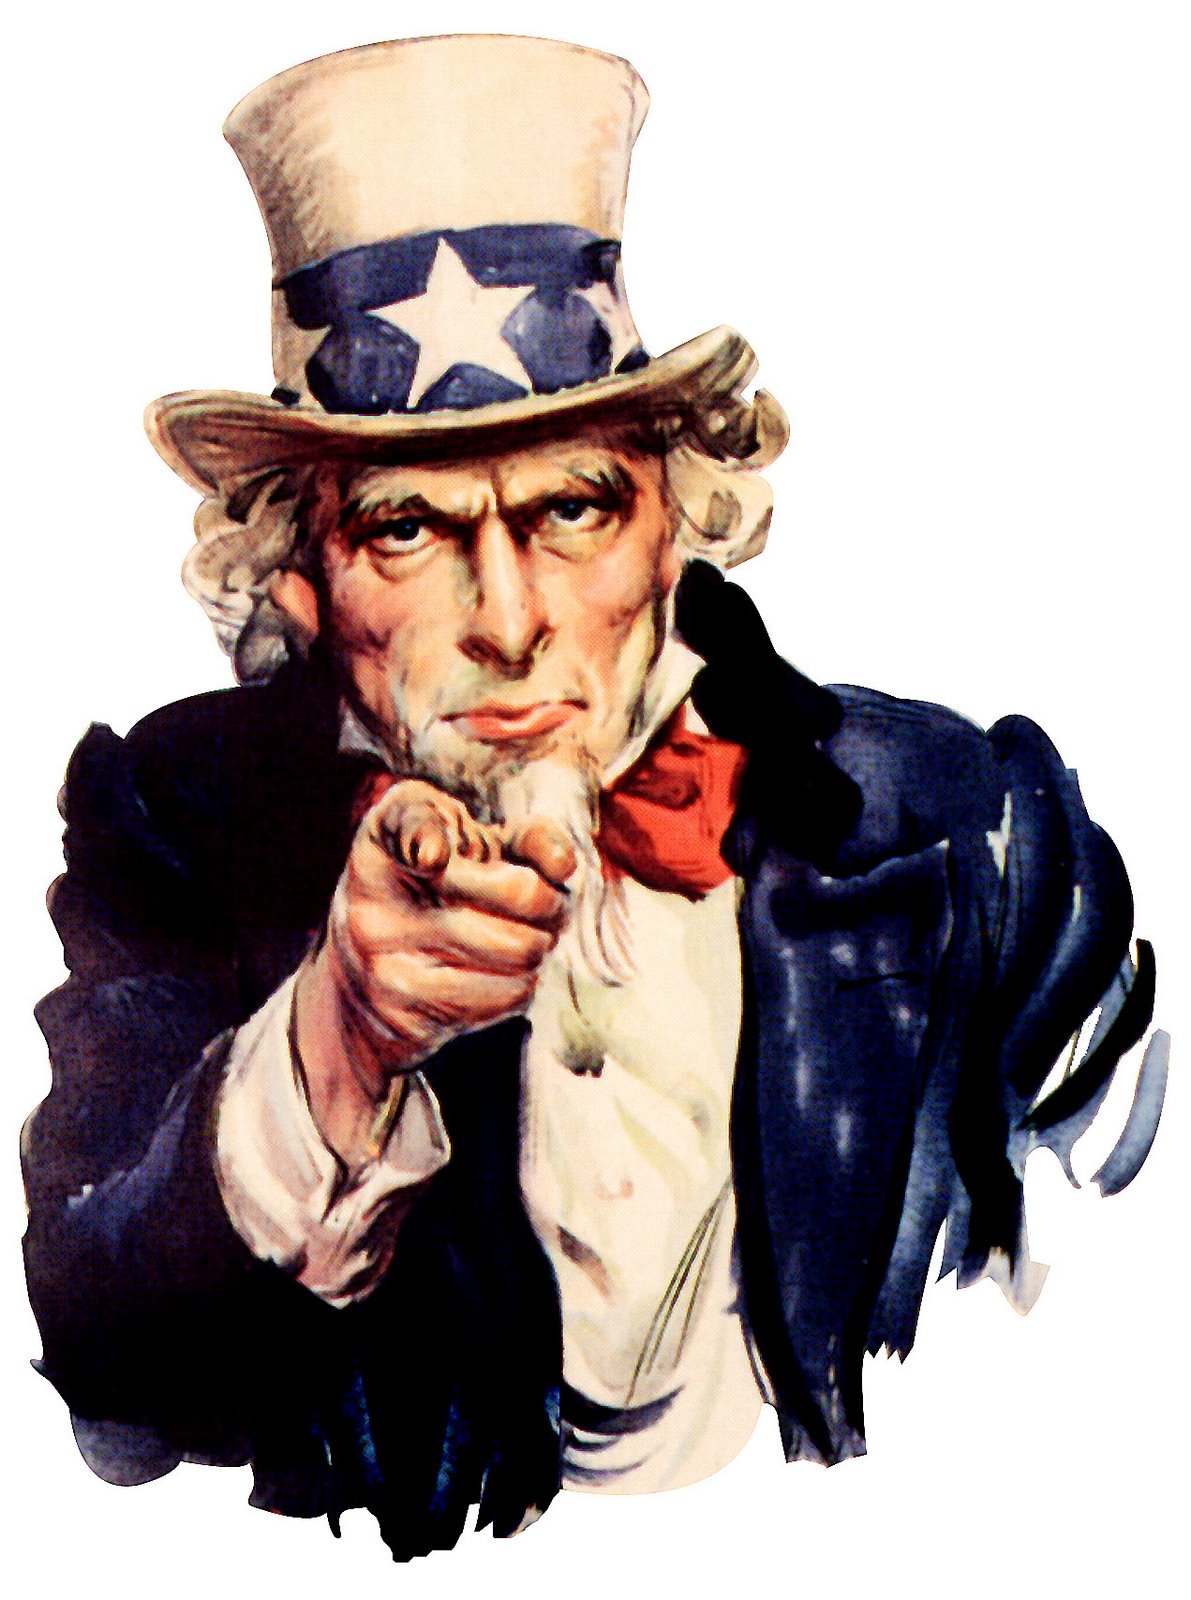 Free Uncle Sam I Want You Png, Download Free Clip Art, Free.